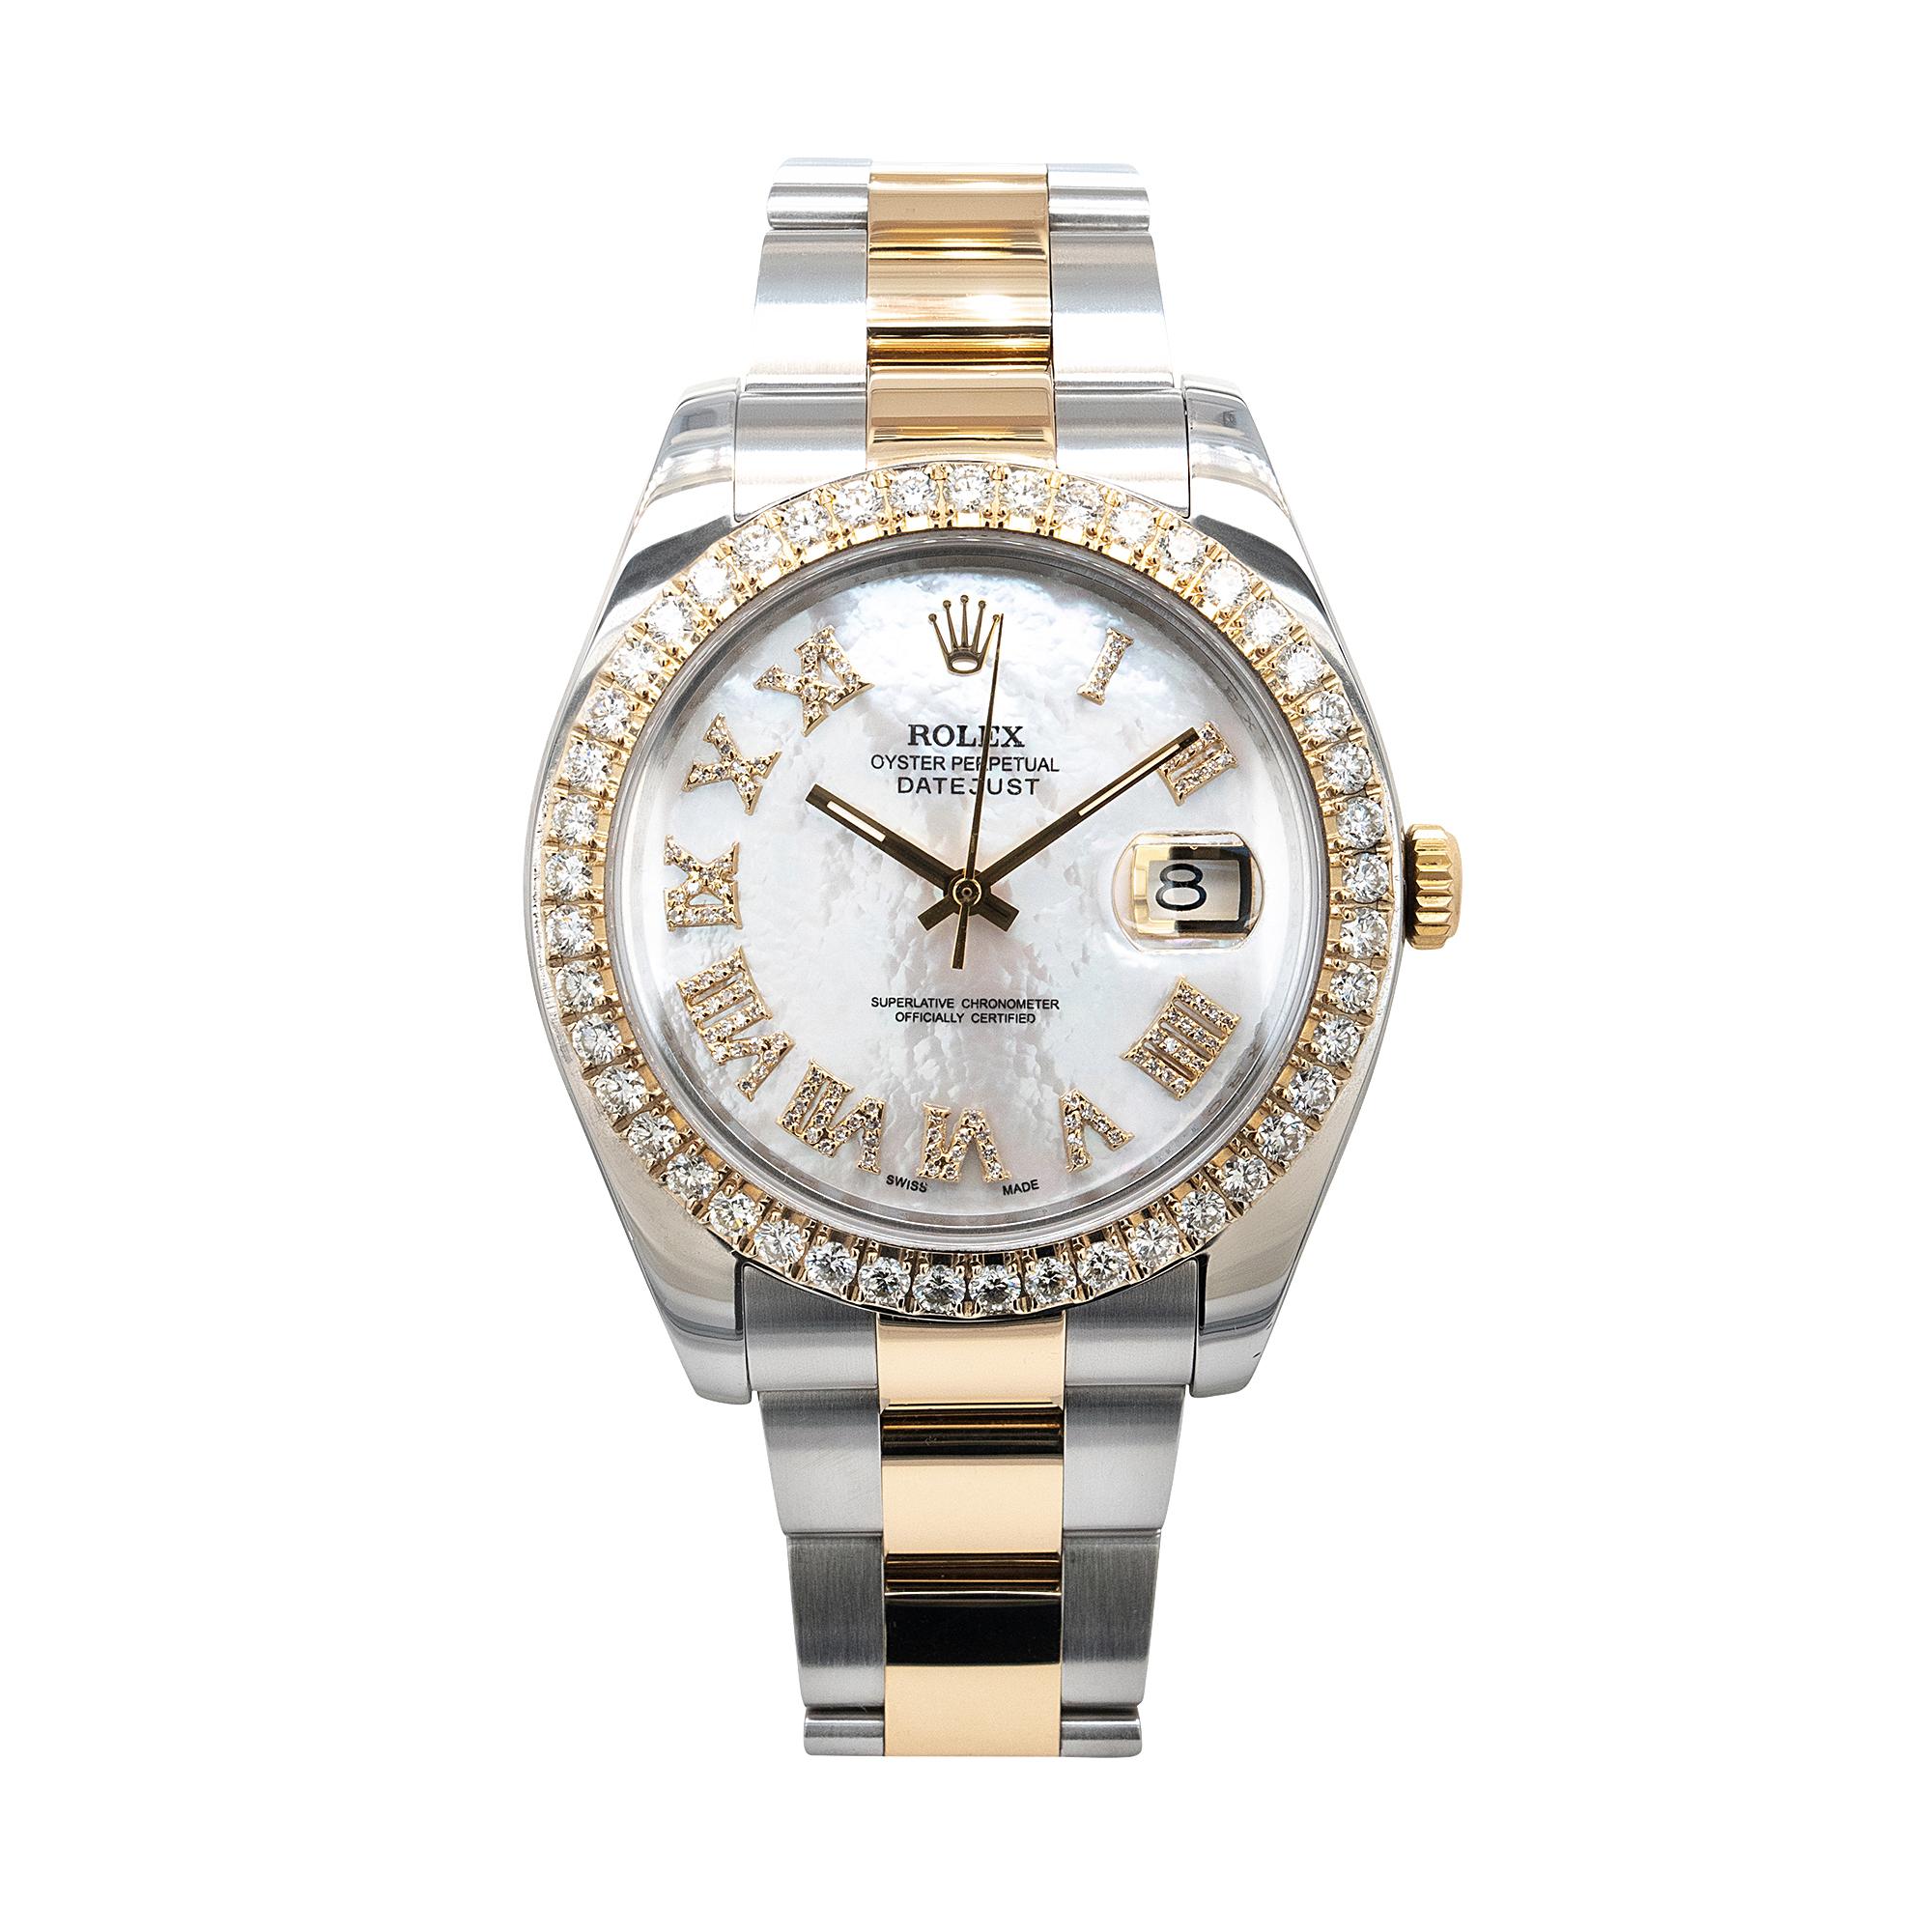 Brand: Rolex
Model Name: Datejust II
Model Number: 116333
Case Material: Stainless Steel
Case Diameter: 41.0mm
Crystal: Scratch Resistant Sapphire Crystal
Bezel: Custom Gold Diamond
Dial: Oyster Perpetual Datejust
Bracelet: 18k Stainless Steel